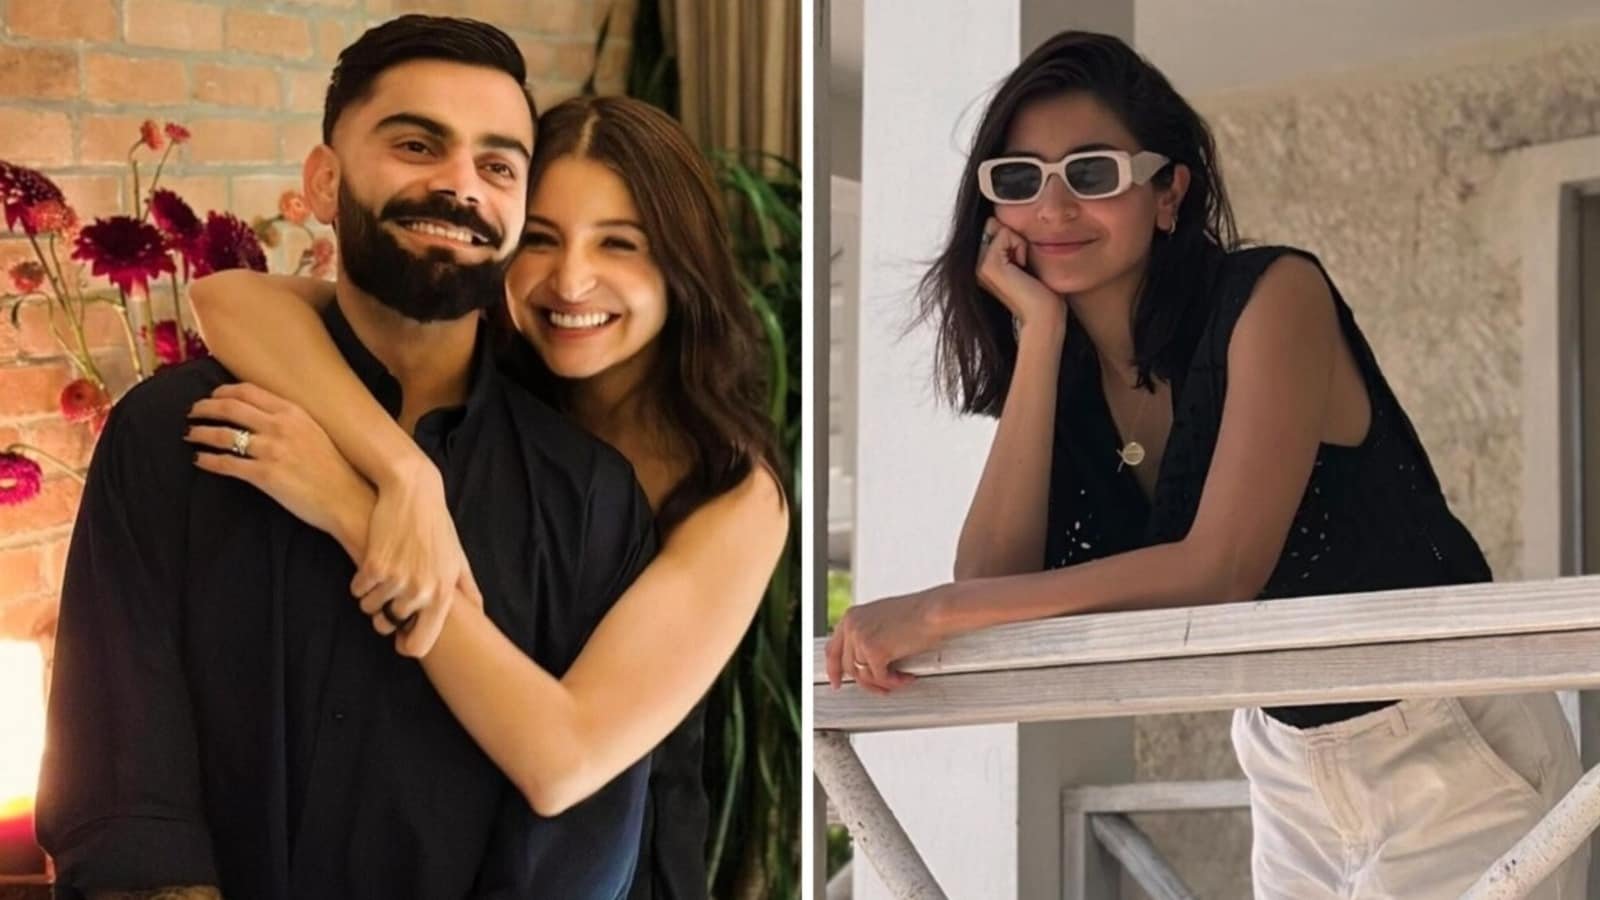 Virat Kohli wrote a sweet message for Anushka Sharma on her birthday, saying that he would have felt very lost if he hadn't found her.